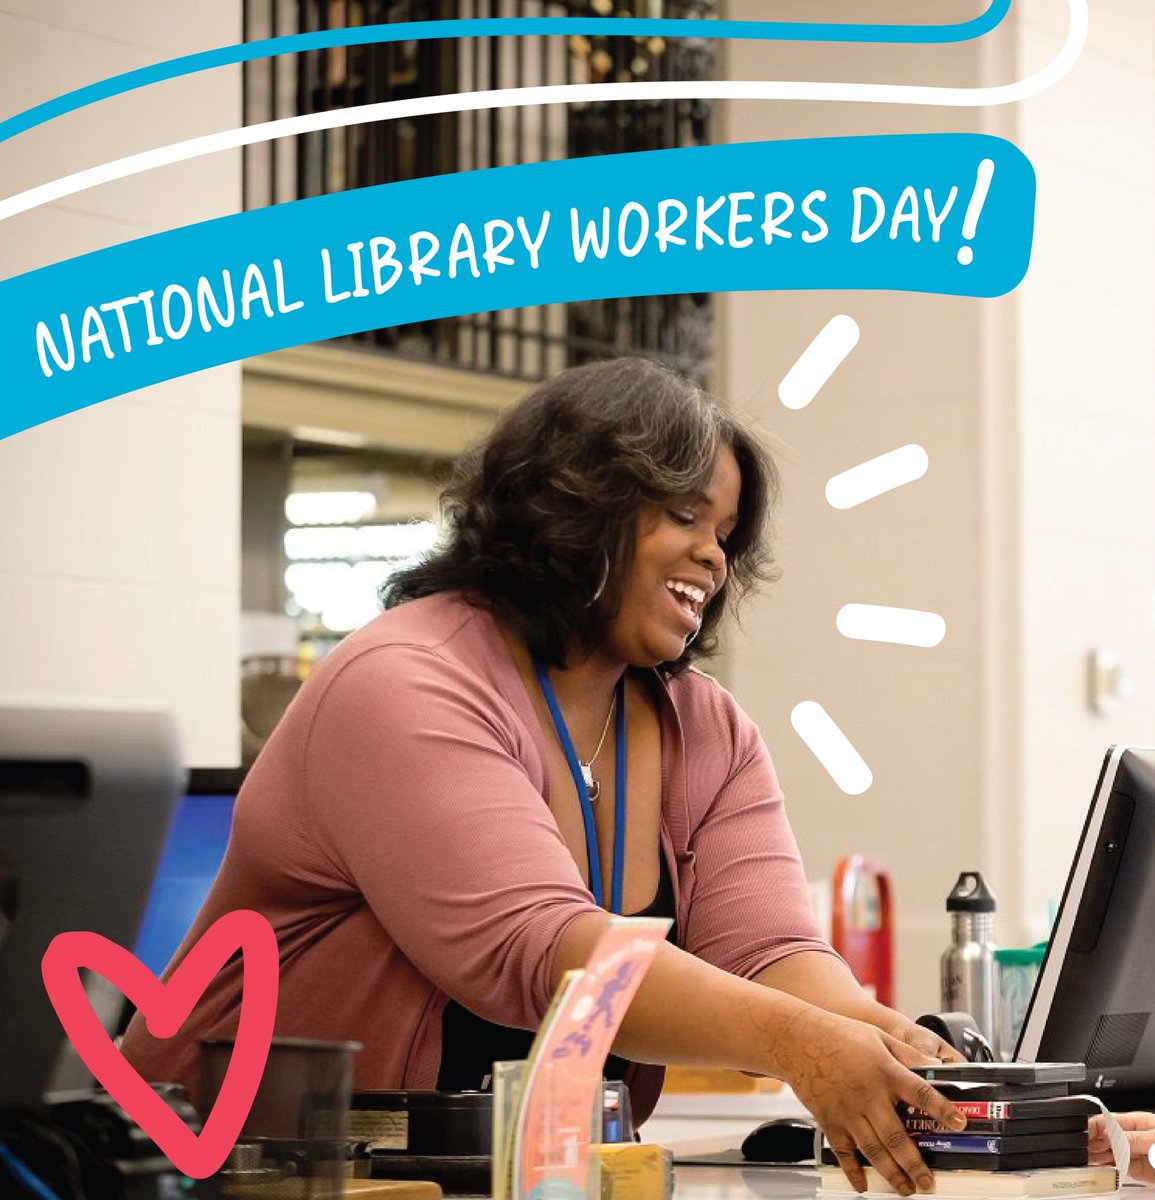 Happy #NationalLibraryWorkersDay! The Free Library appreciates all the librarians, staff, and volunteers who make its mission to guide learning, advance literacy, and inspire curiosity possible!